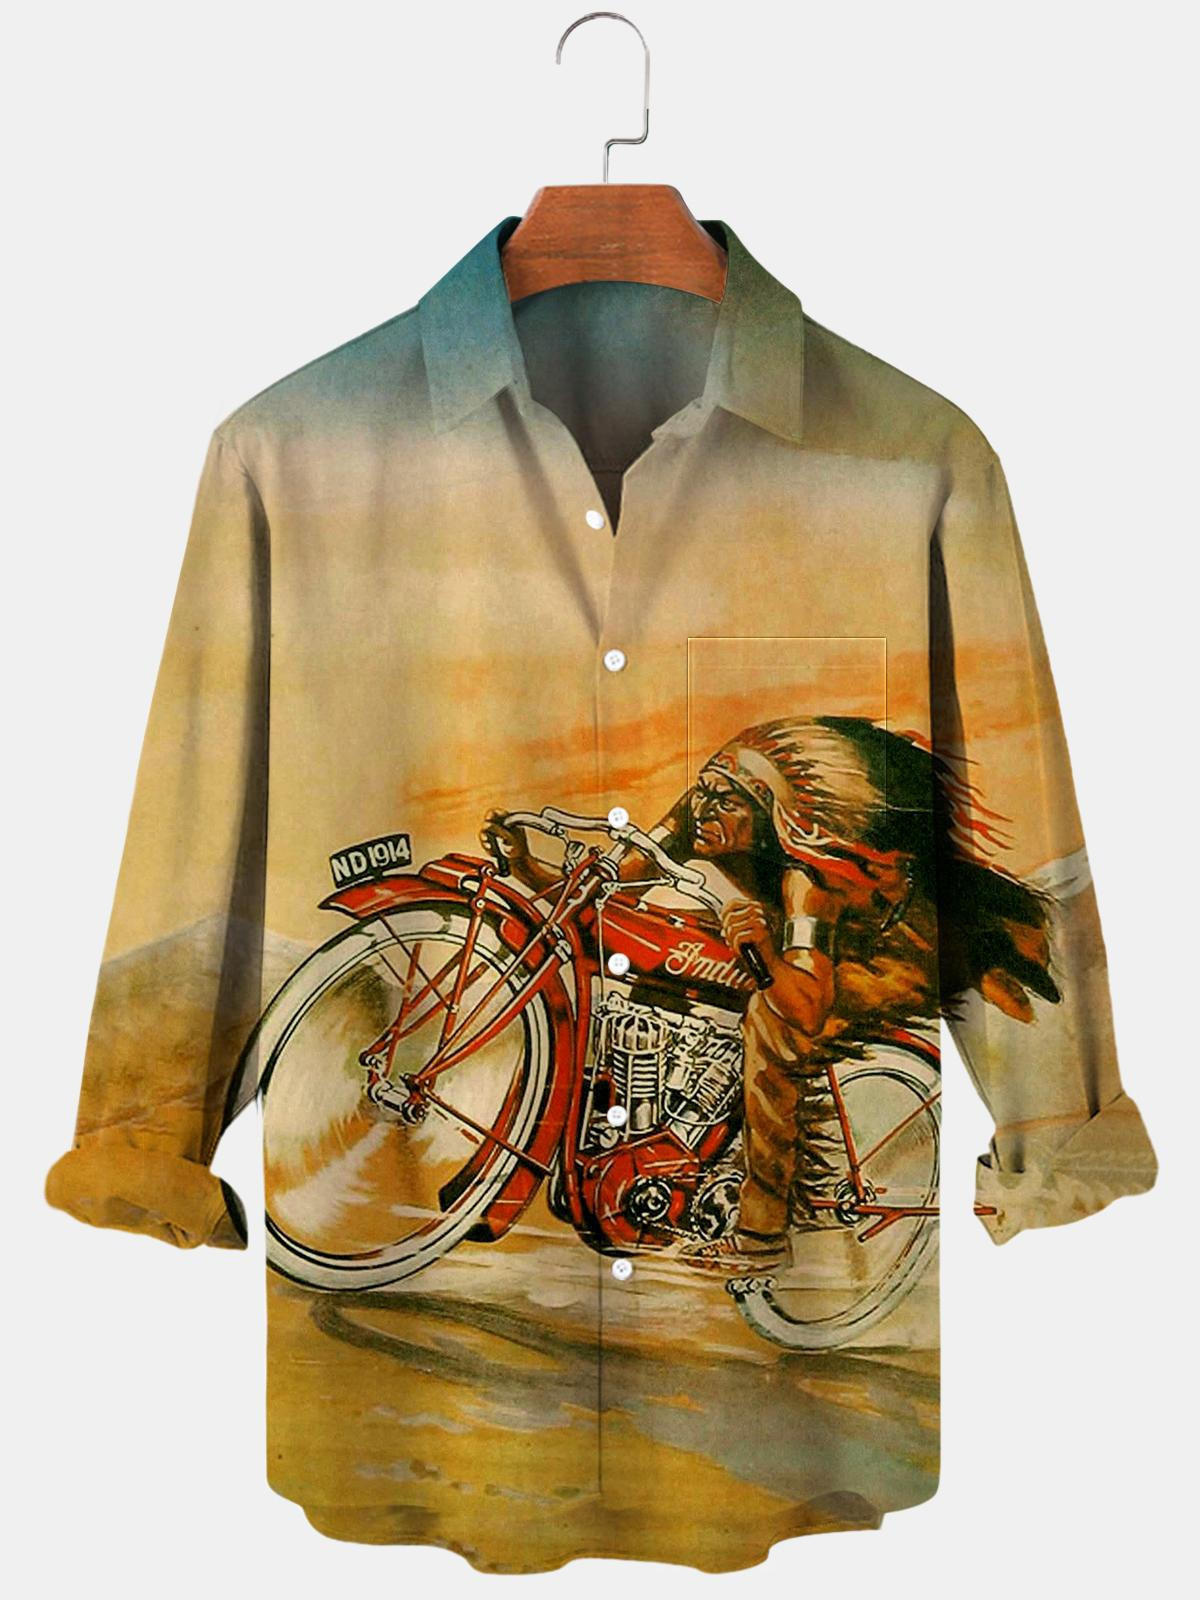 Vintage Indian Motorcycle Long Sleeve Men's Shirts With Pocket